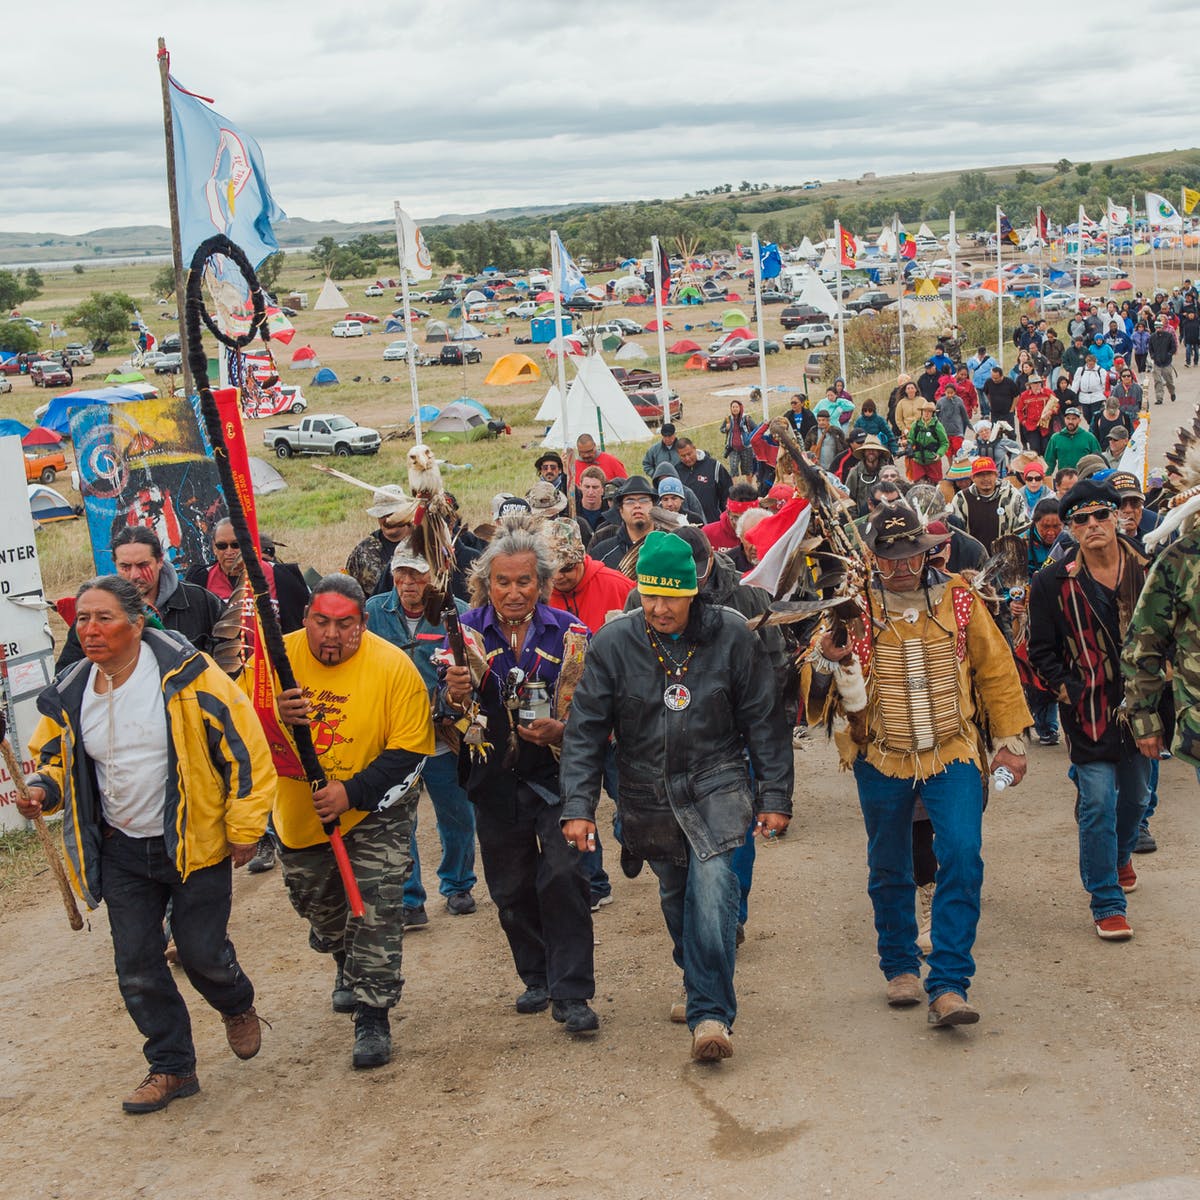 Color photograph of a large crowd of Dakota Access Pipeline protestors marching together through their encampment. Flags fly on poles along their path and tents, cars, tipis populate the grassy plain behind the marchers. Four of the Native American men in the foreground are carrying staffs and wearing face paint.